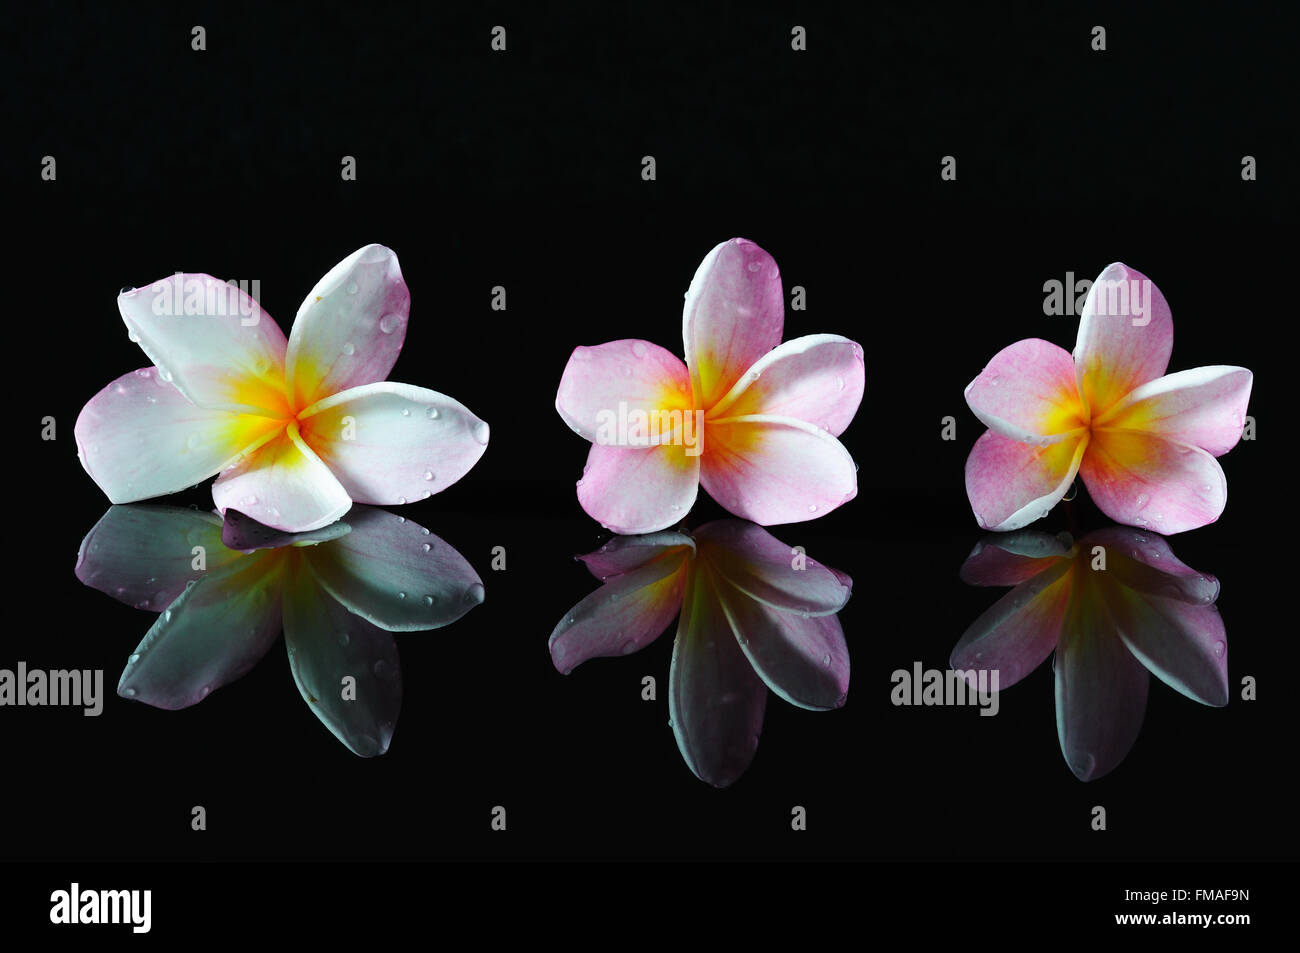 Spa, beauty and wellness concept - Frangipani flowers and reflection with dark background. Stock Photo